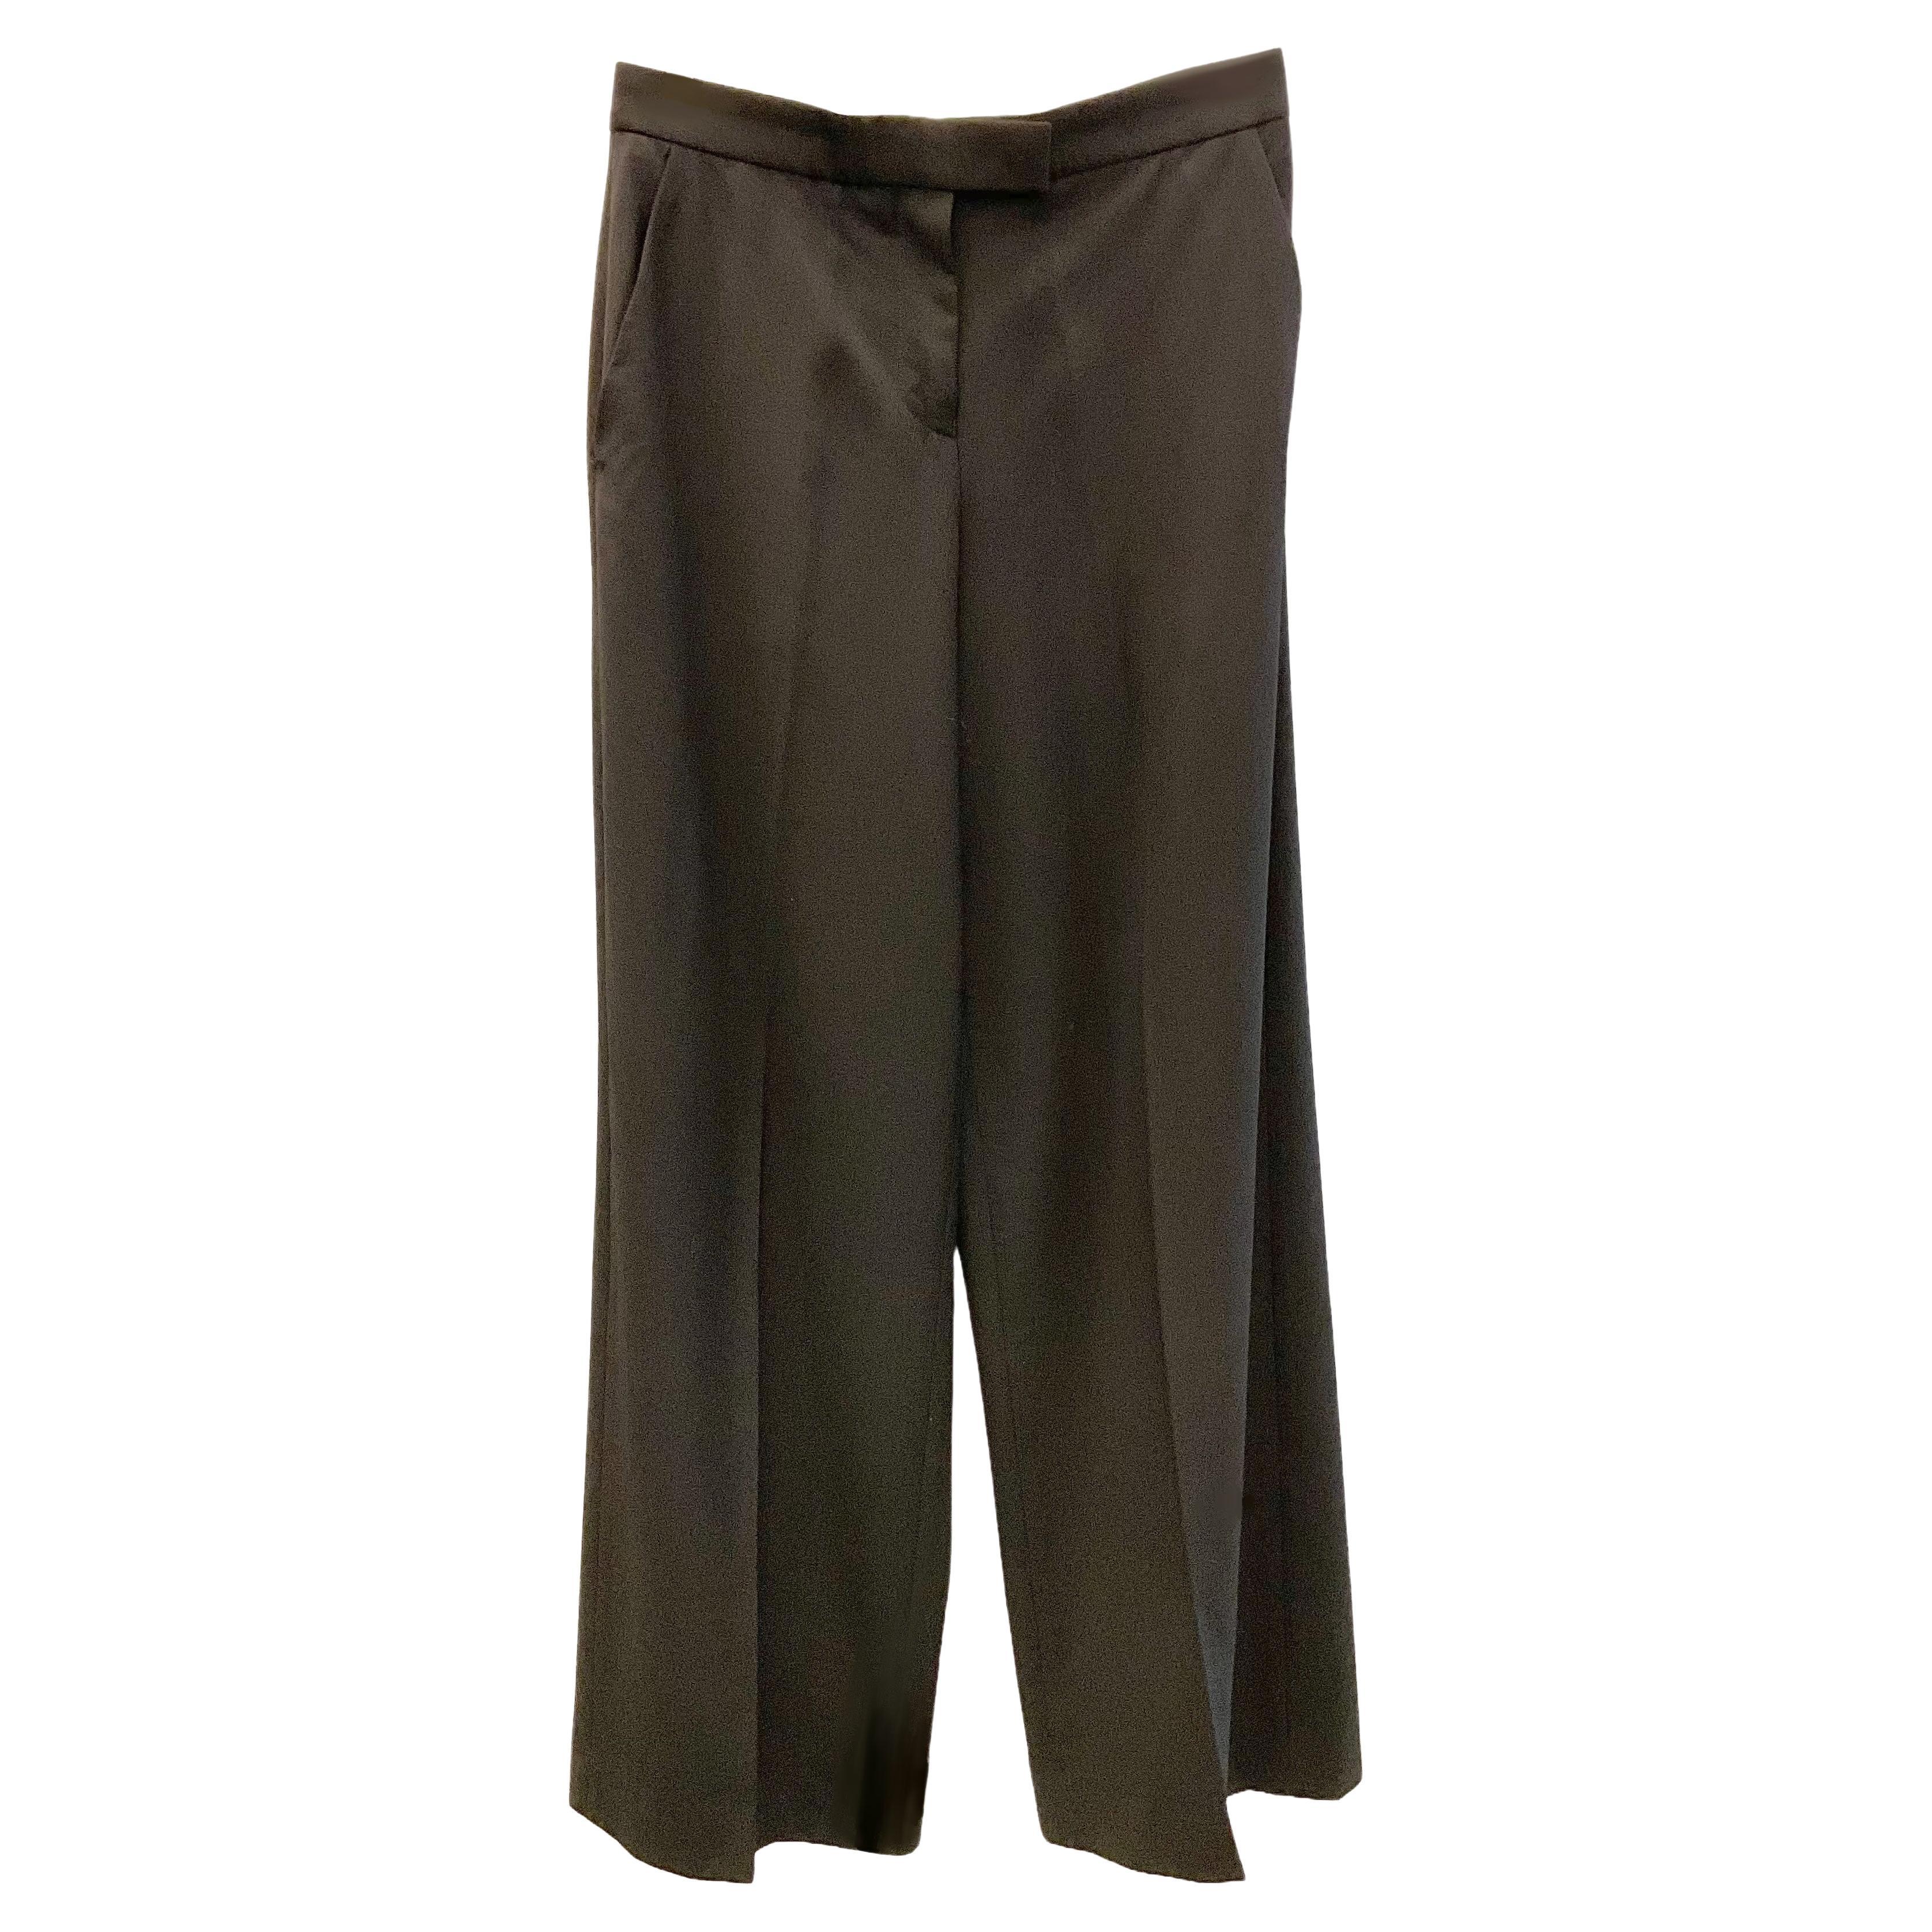 ALEXANDER McQUEEN Black tailored pants in cool wool. For Sale